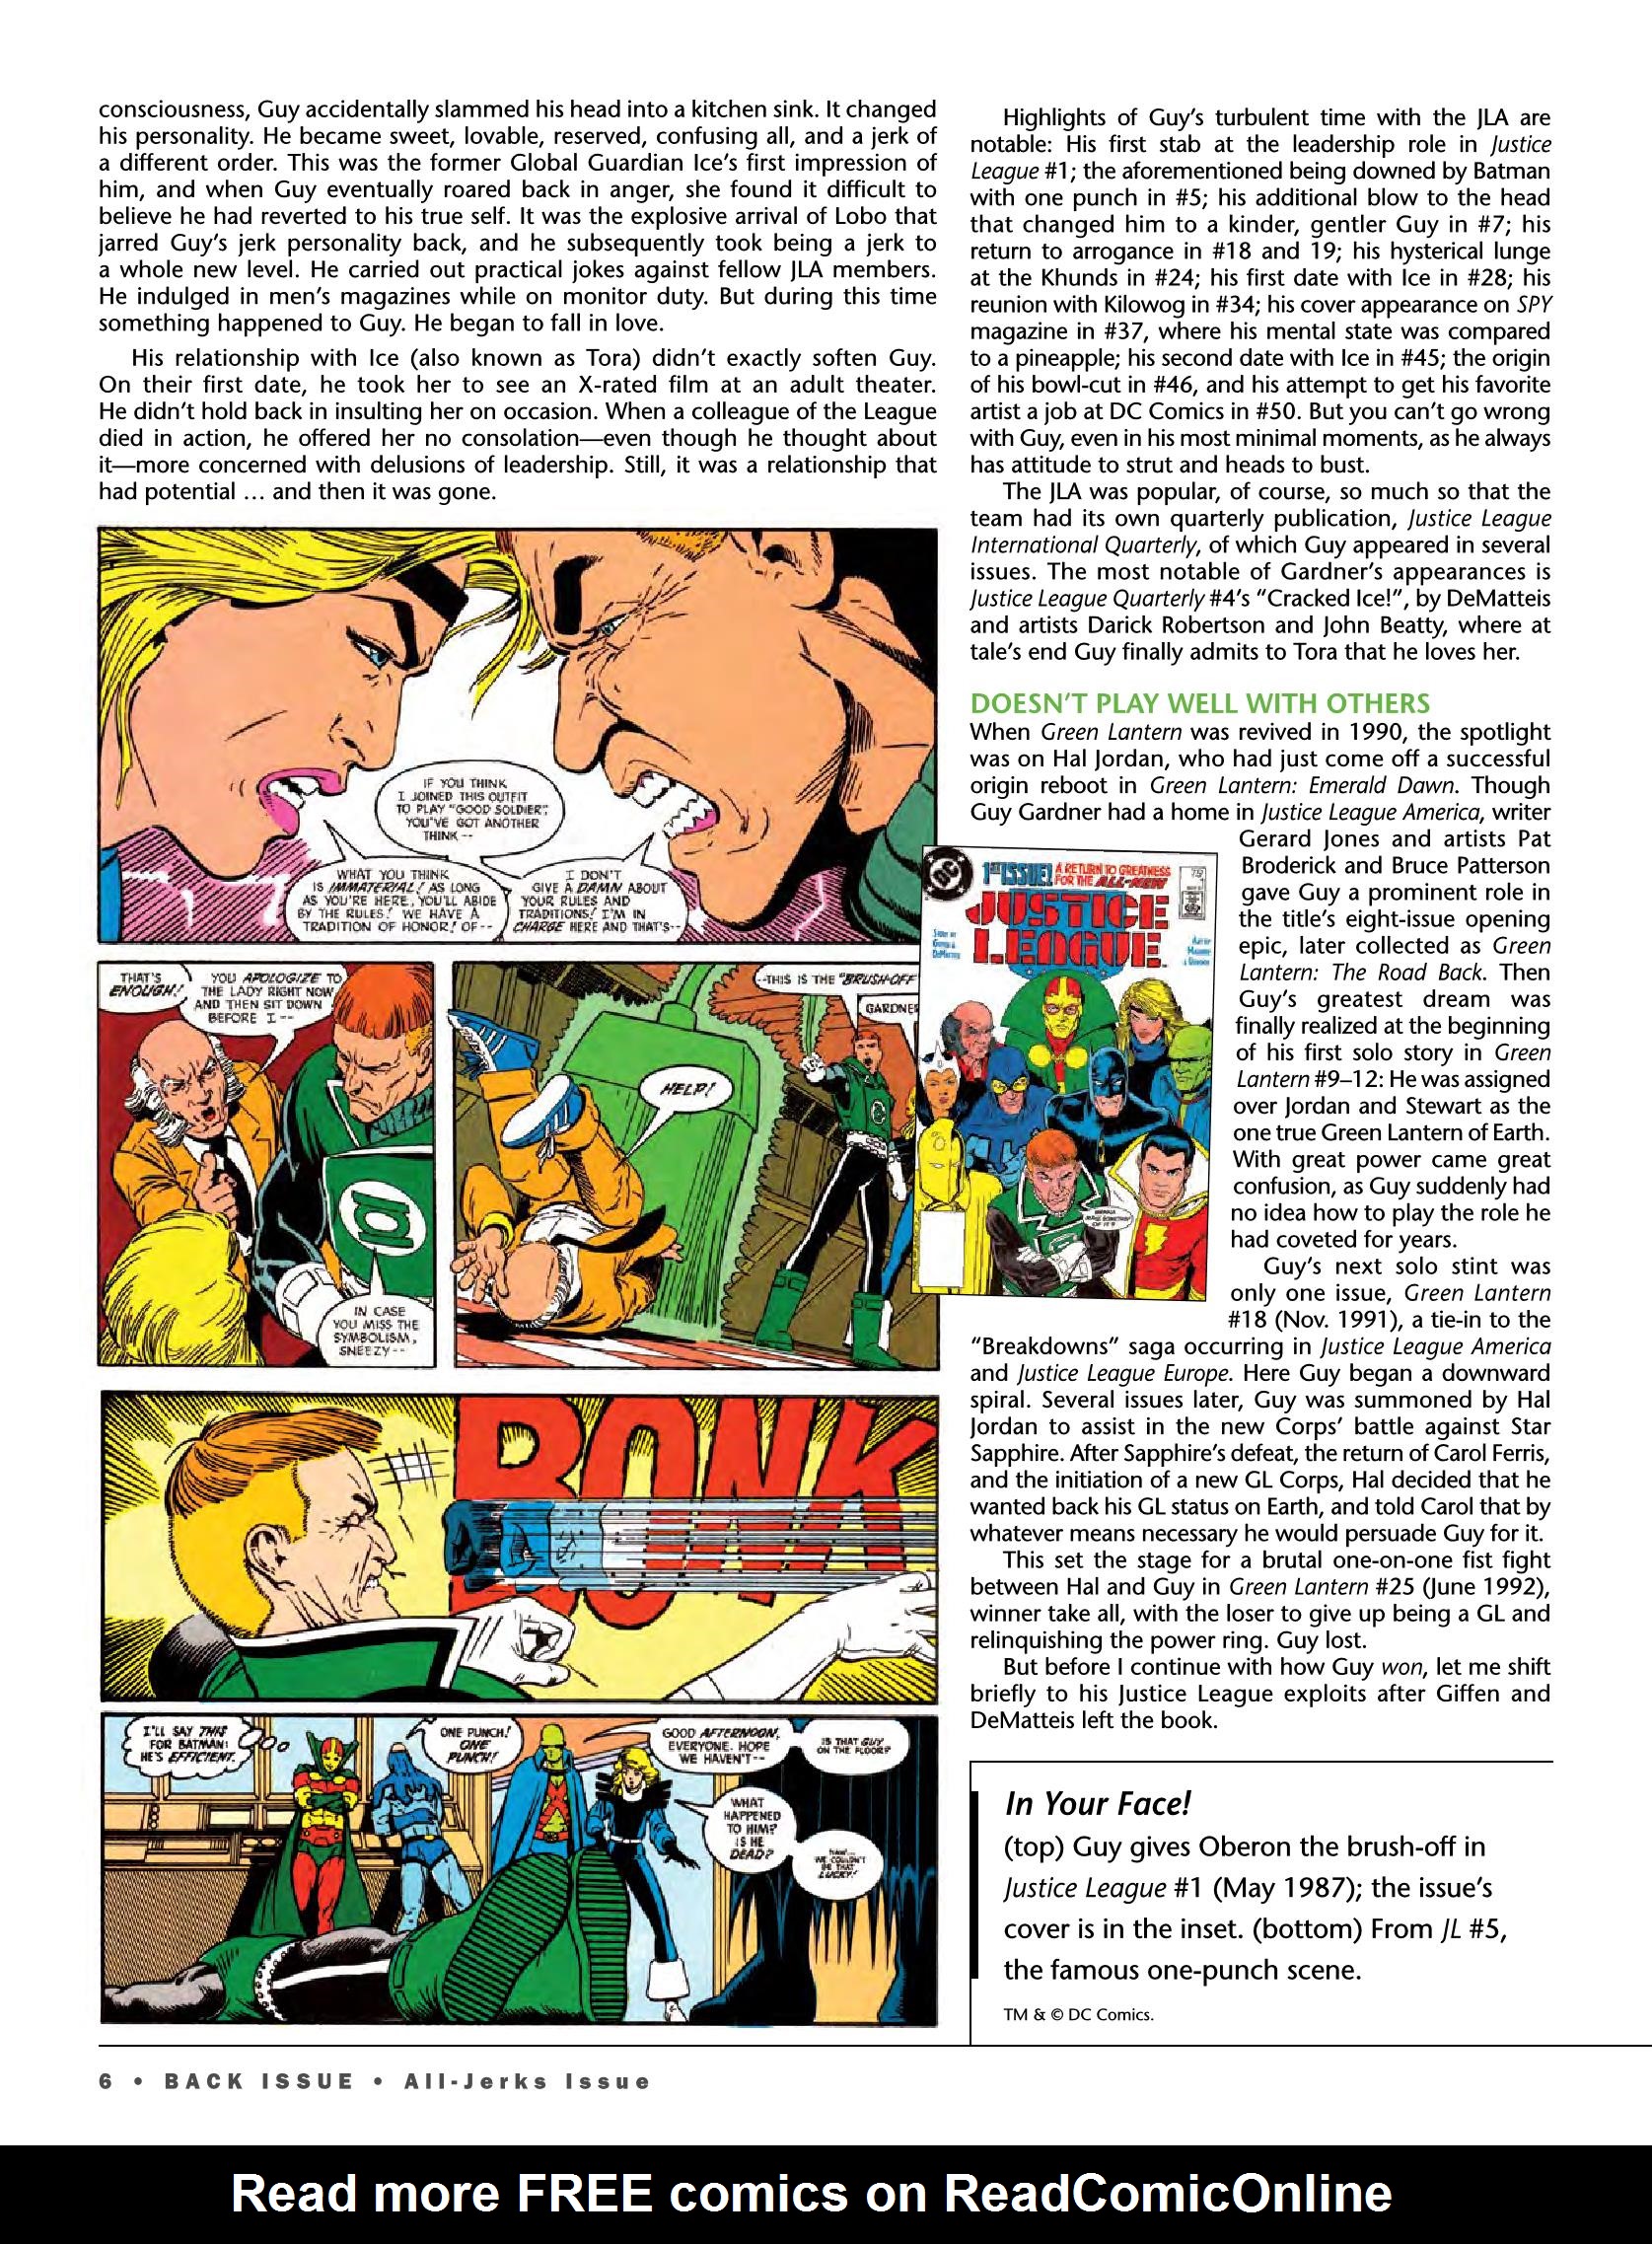 Read online Back Issue comic -  Issue #91 - 78